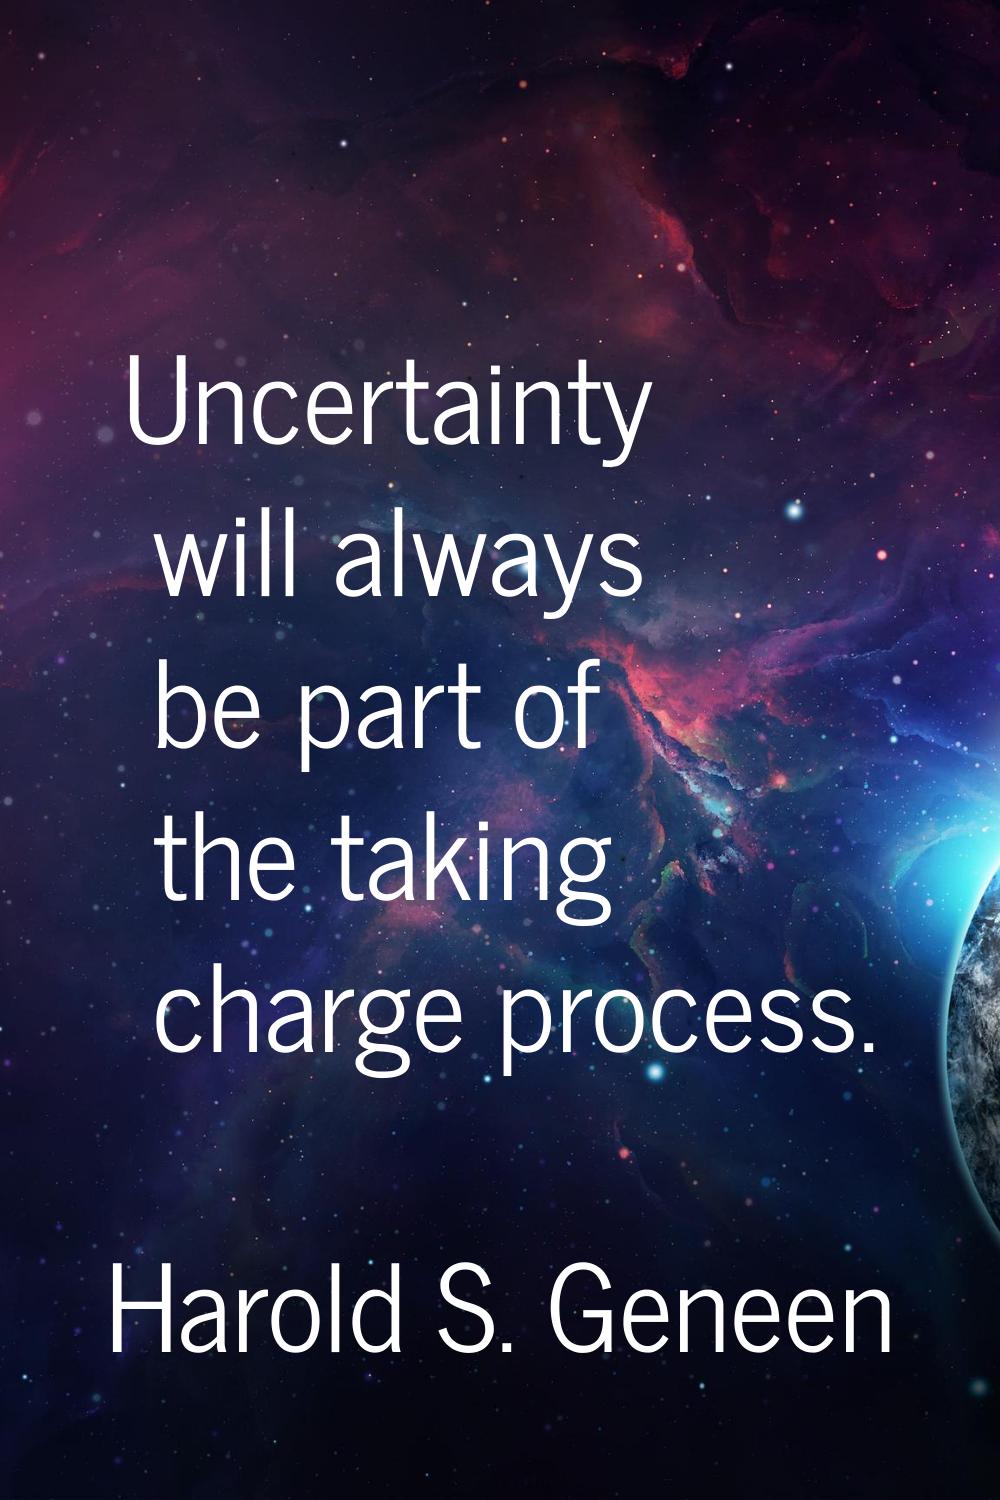 Uncertainty will always be part of the taking charge process.